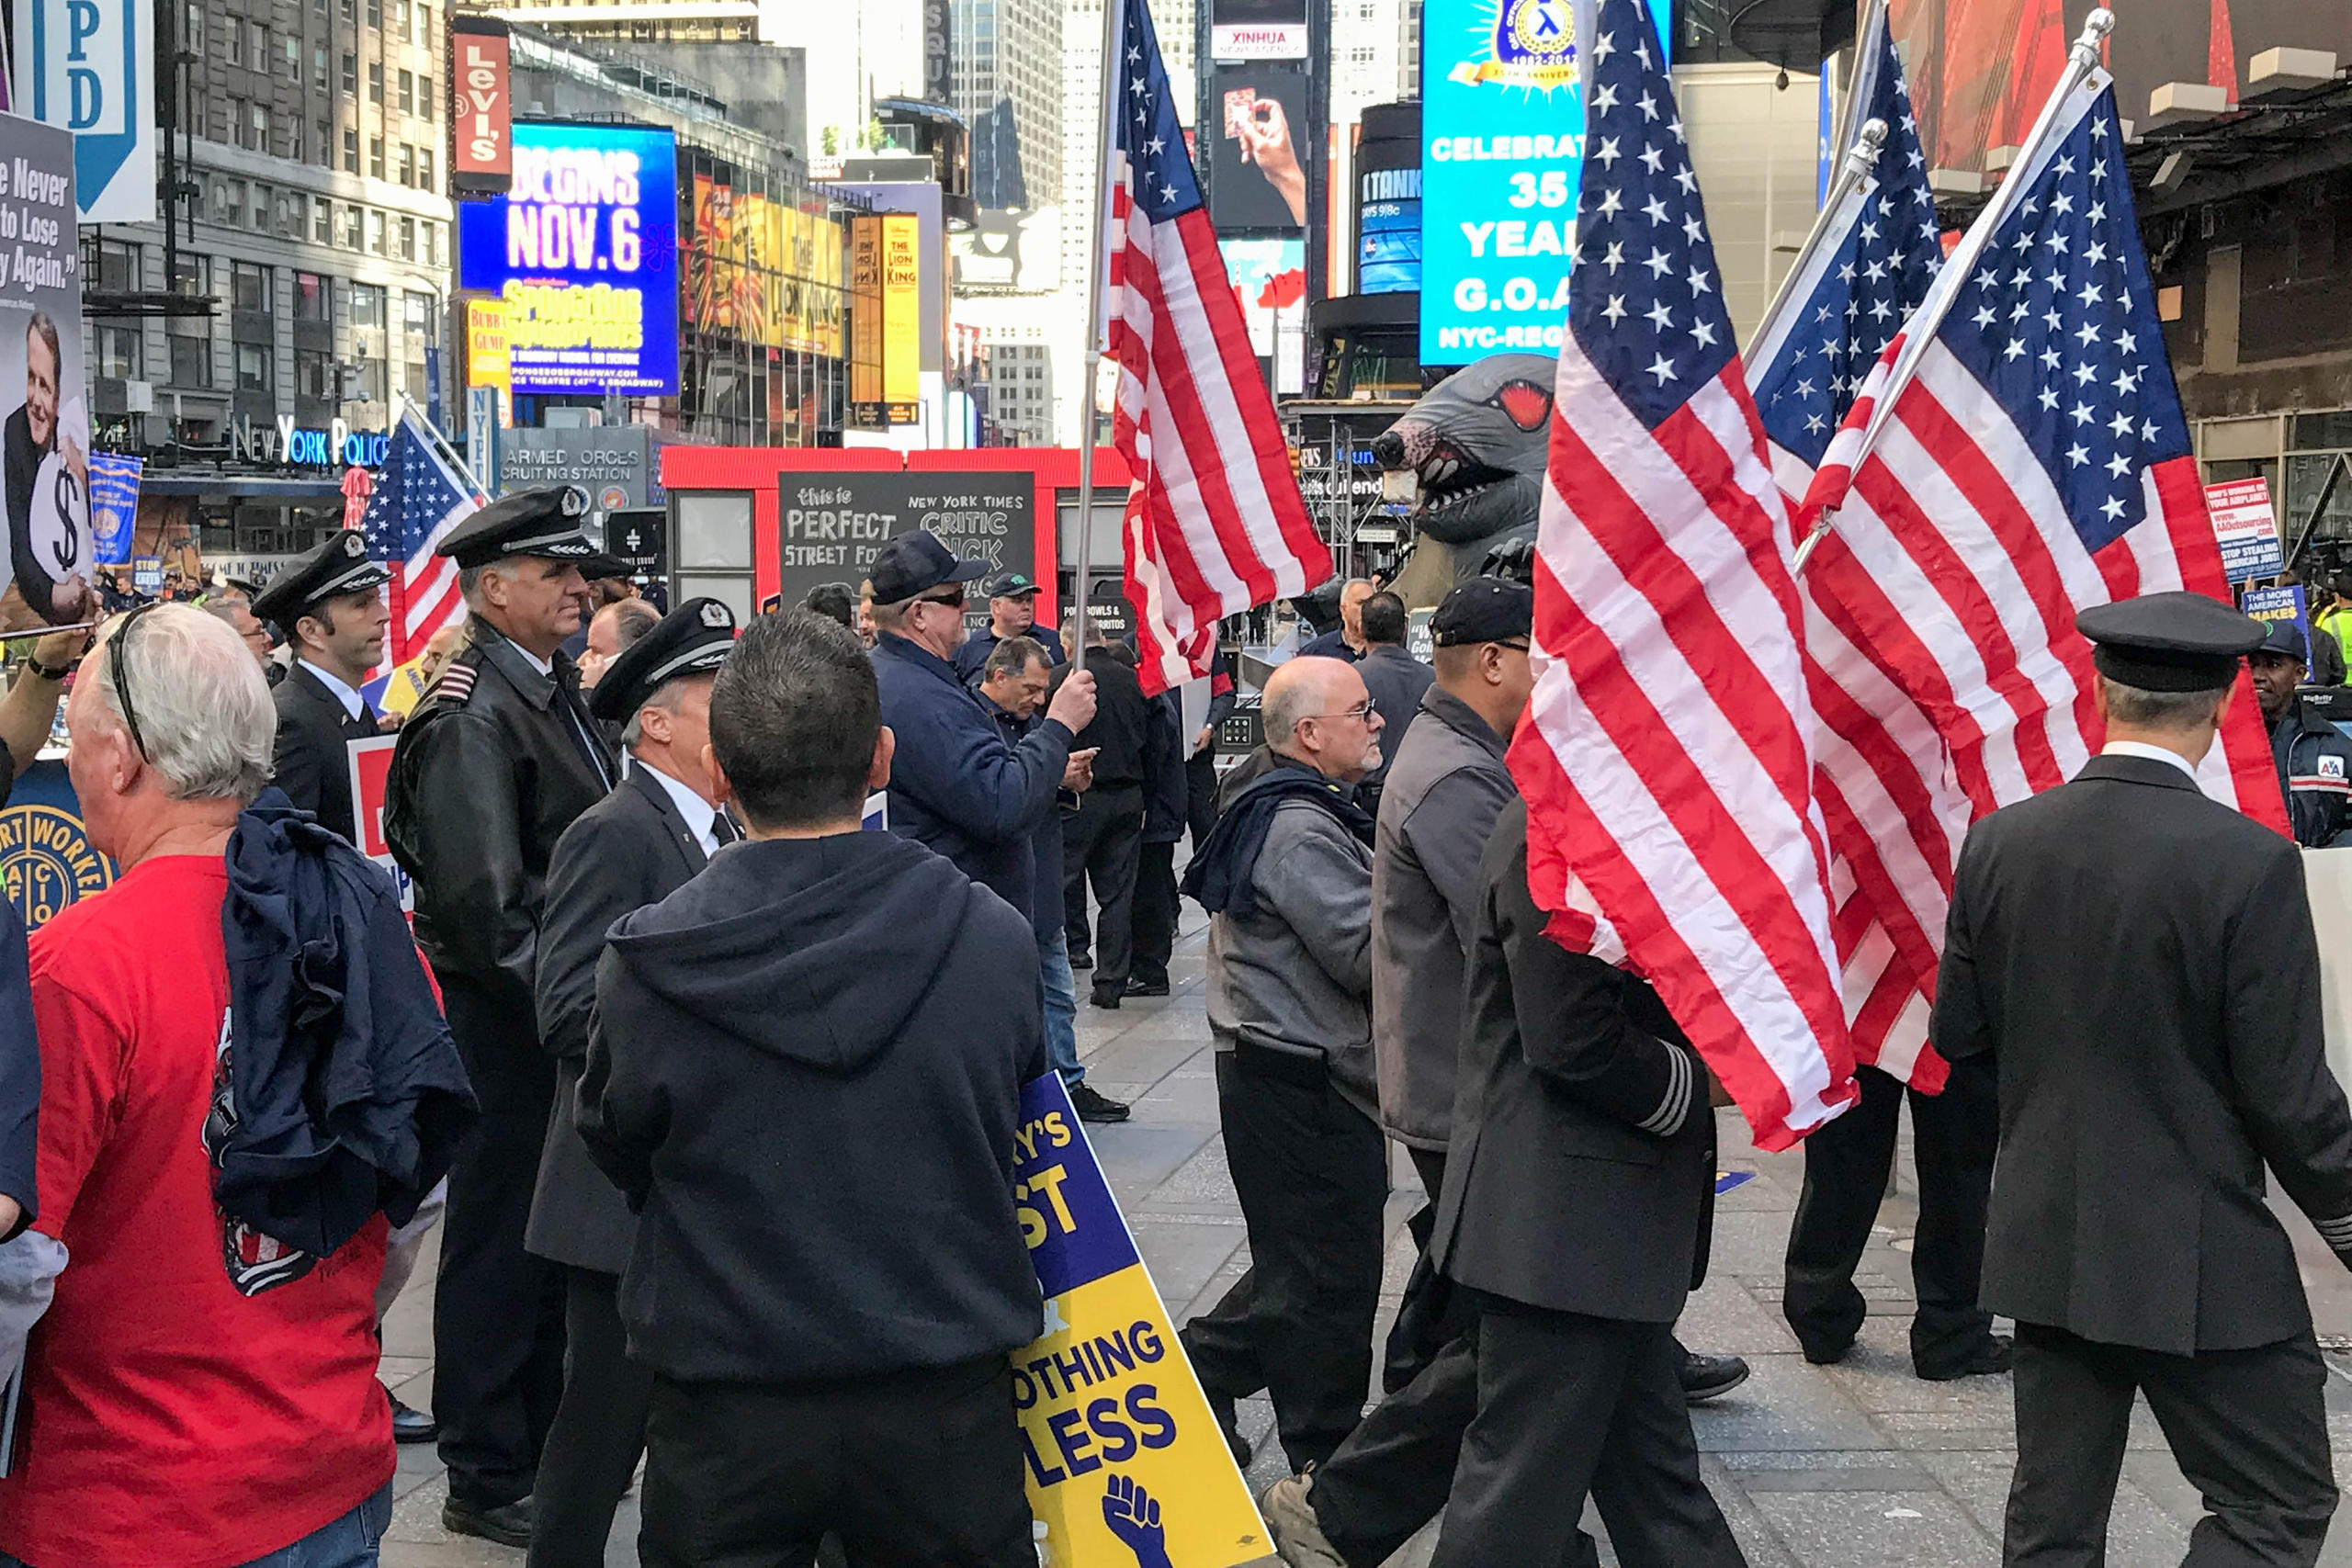 People in uniform carrying the American flag in the streets